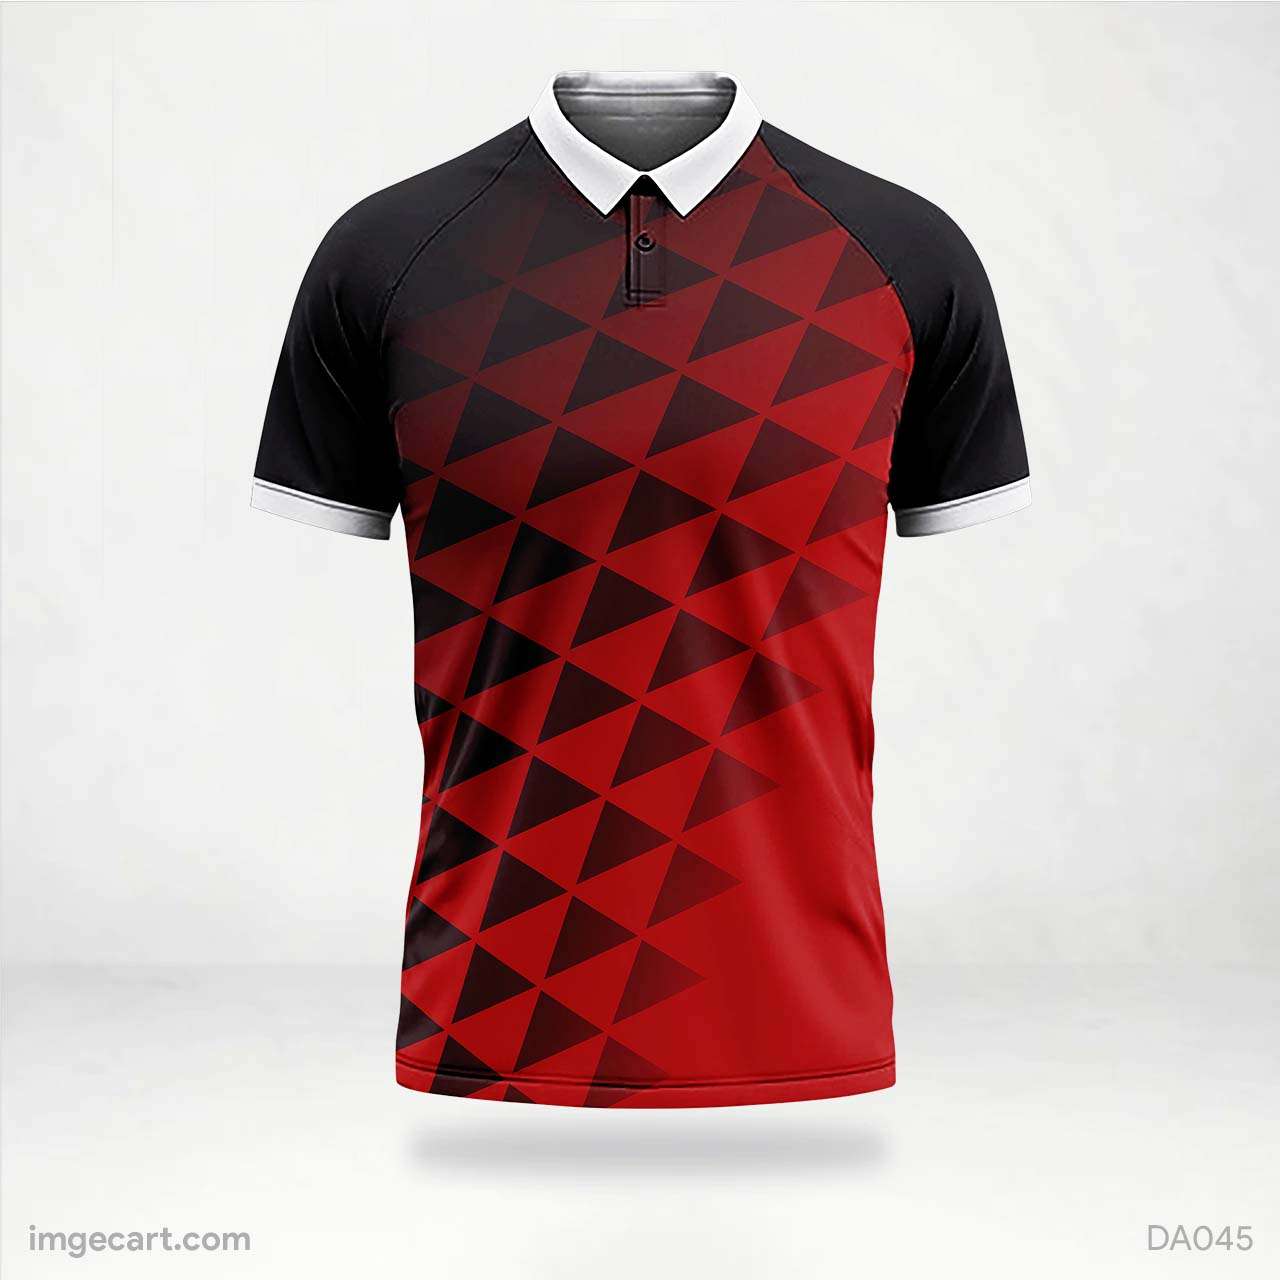 Cricket Jersey design Black and Red with Triangle Effect - imgecart